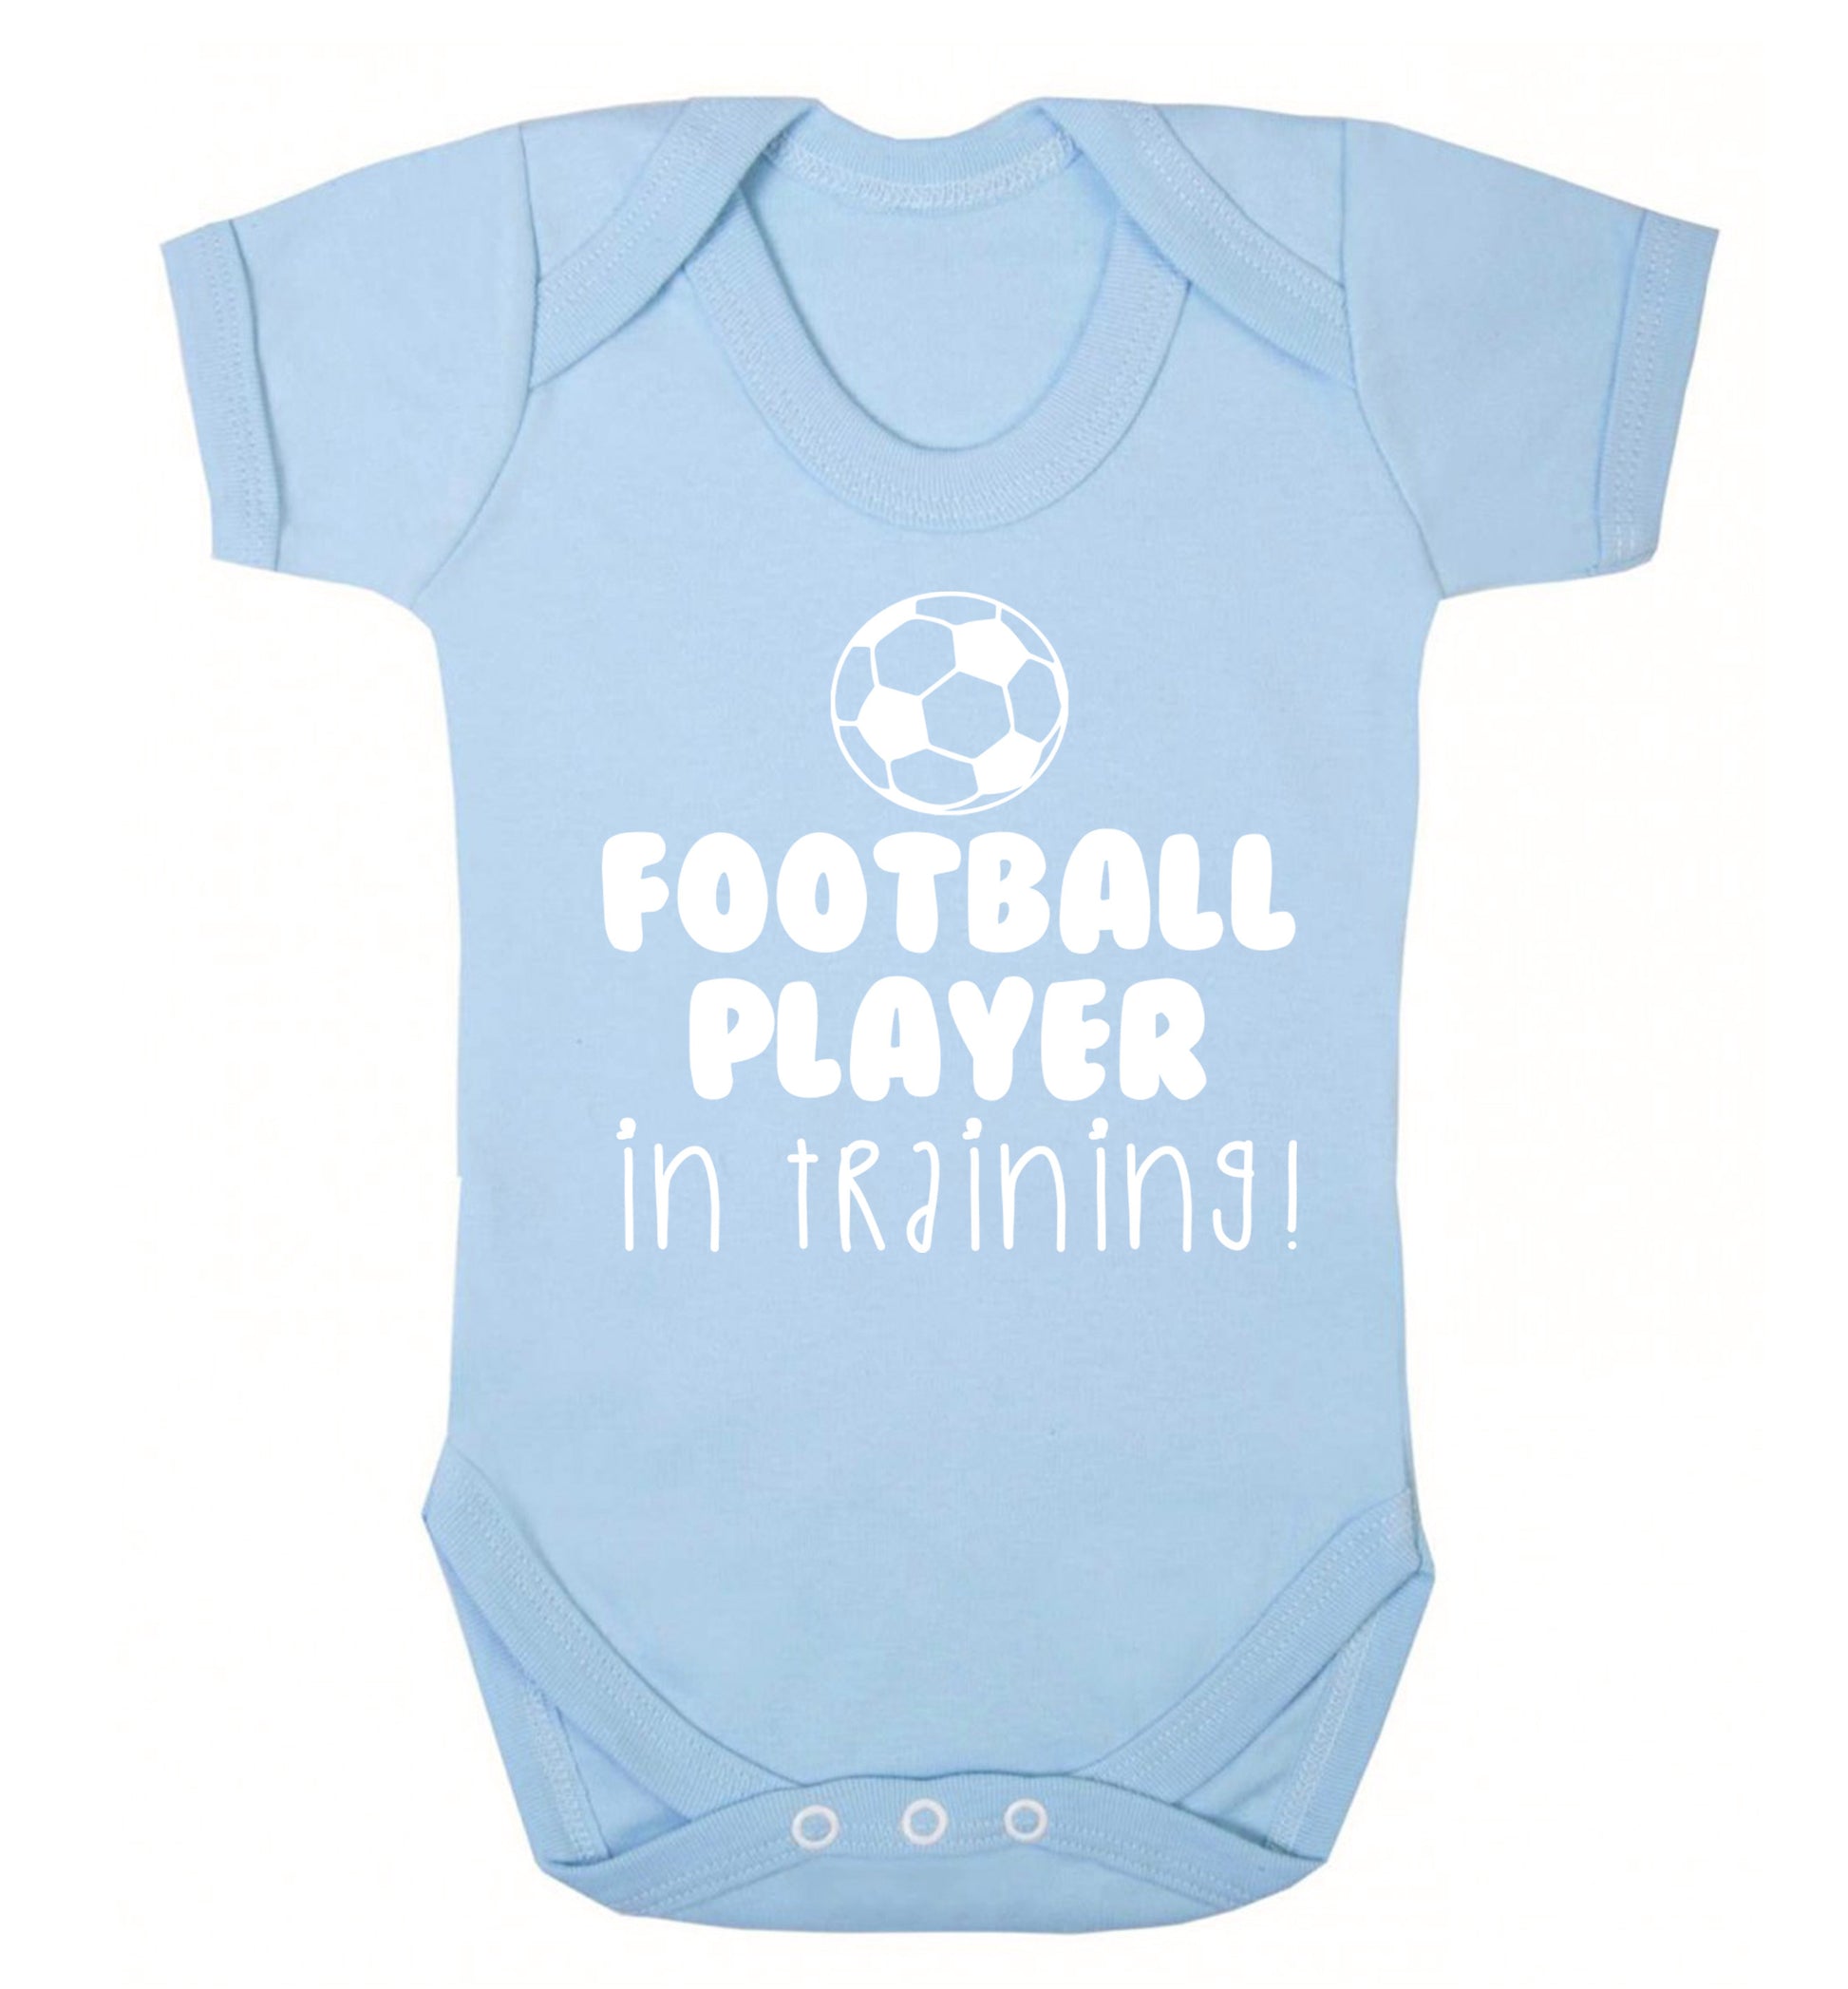 Football player in training Baby Vest pale blue 18-24 months